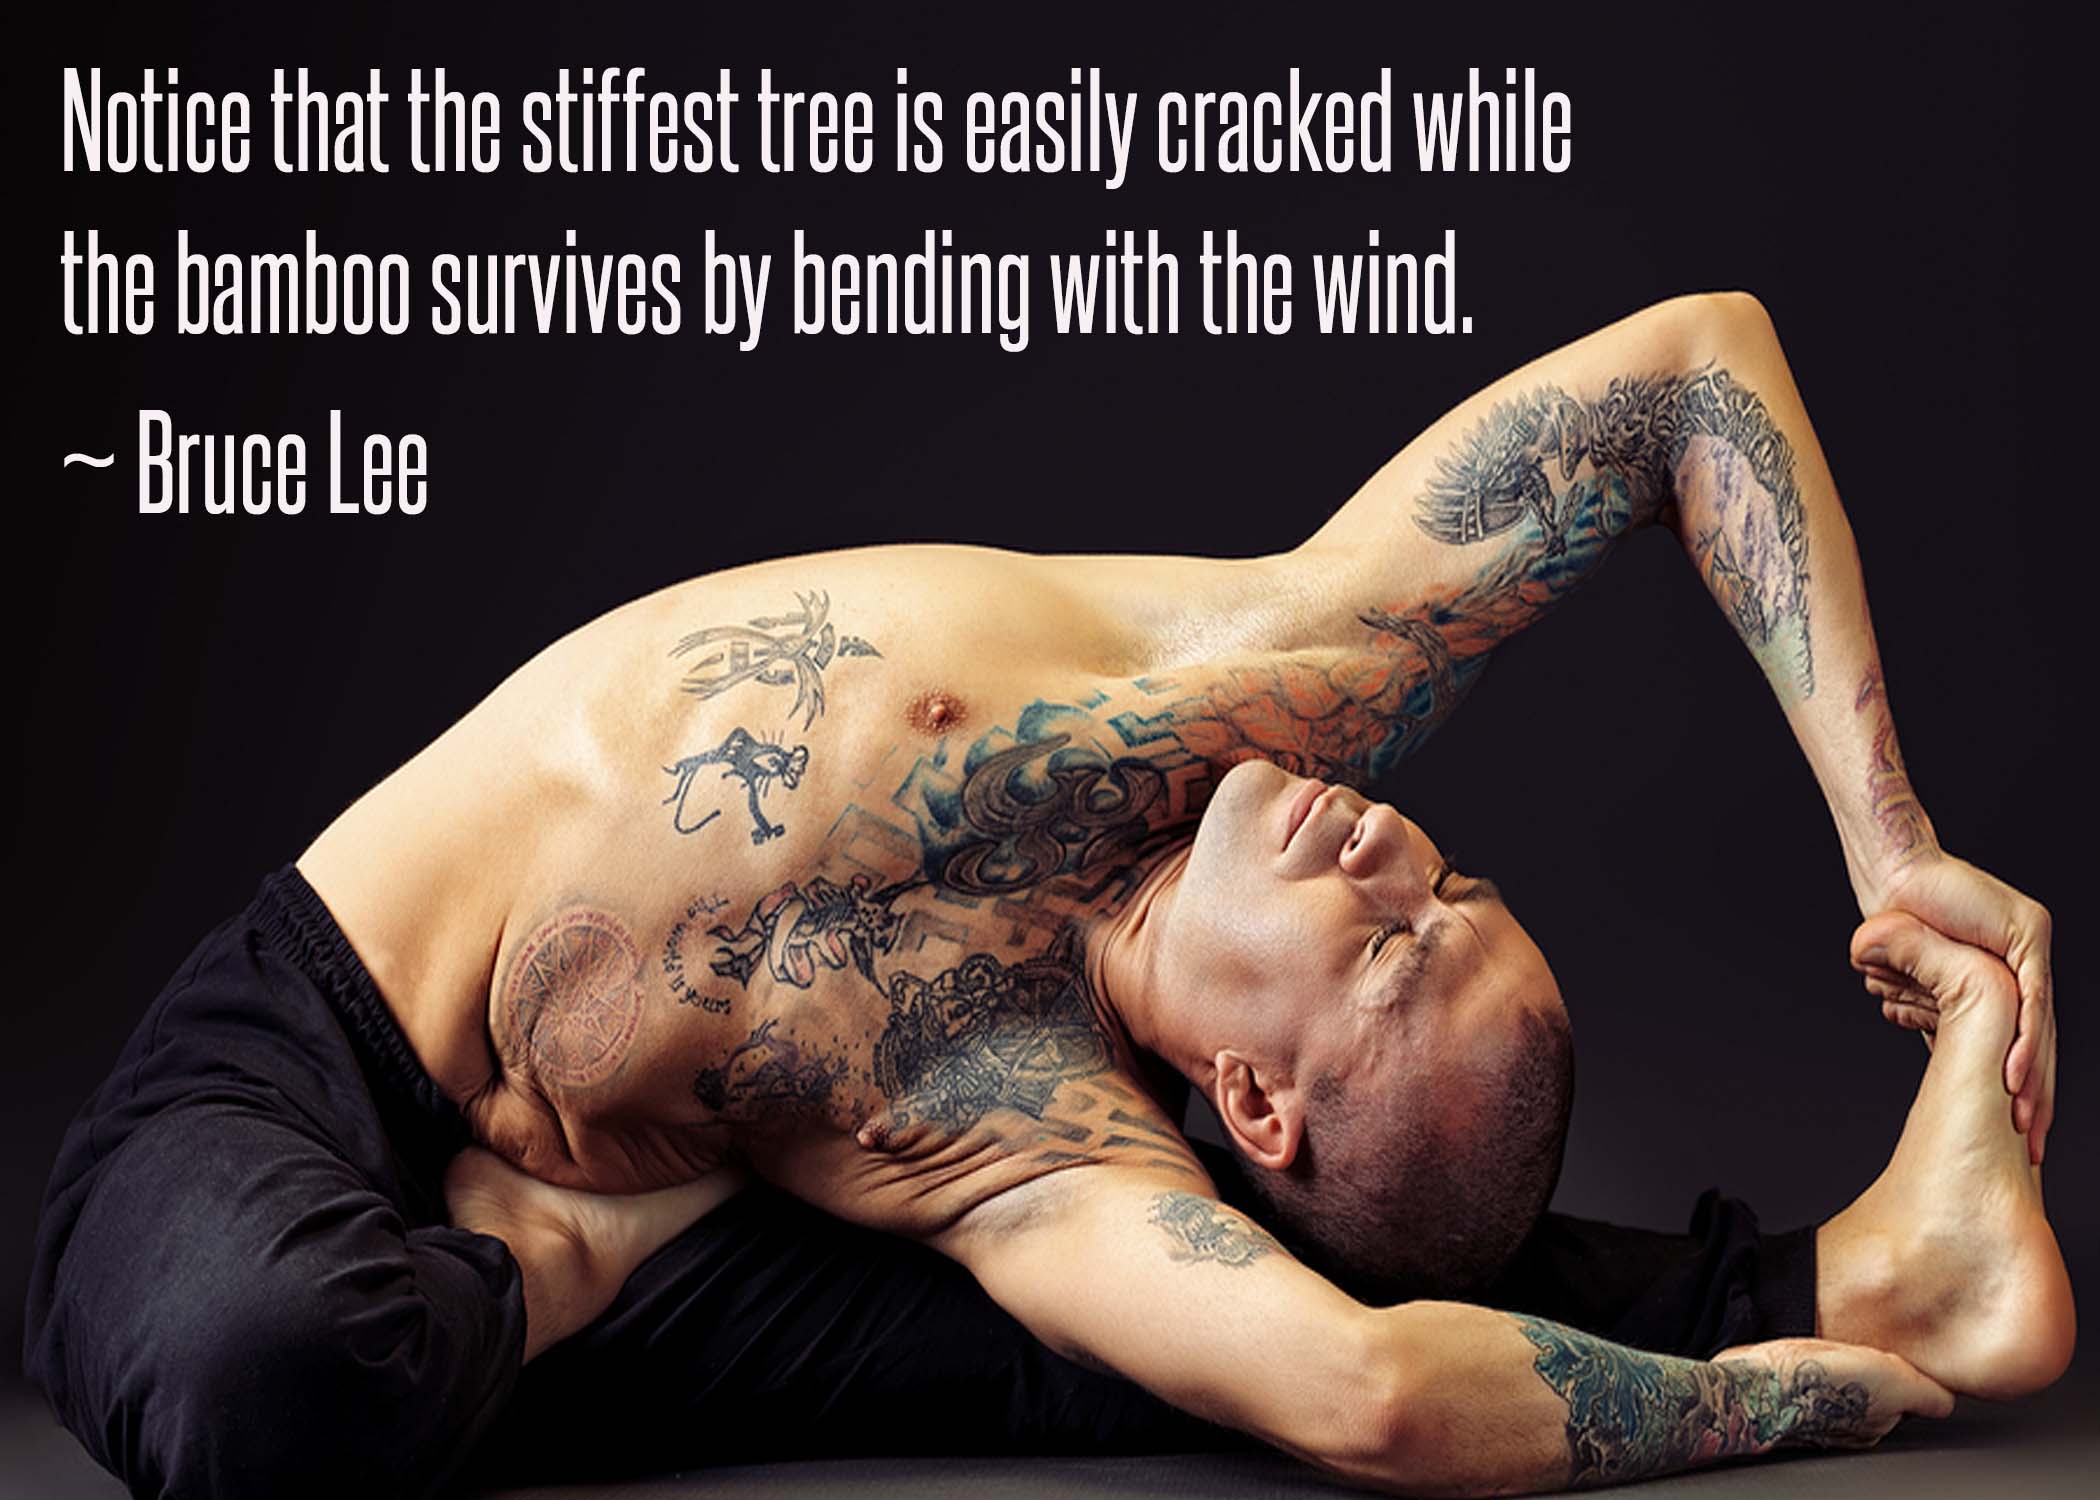 Notice that the stiffest tree is most easily cracked, while the bamboo or willow survives by bending with the wind. Bruce Lee